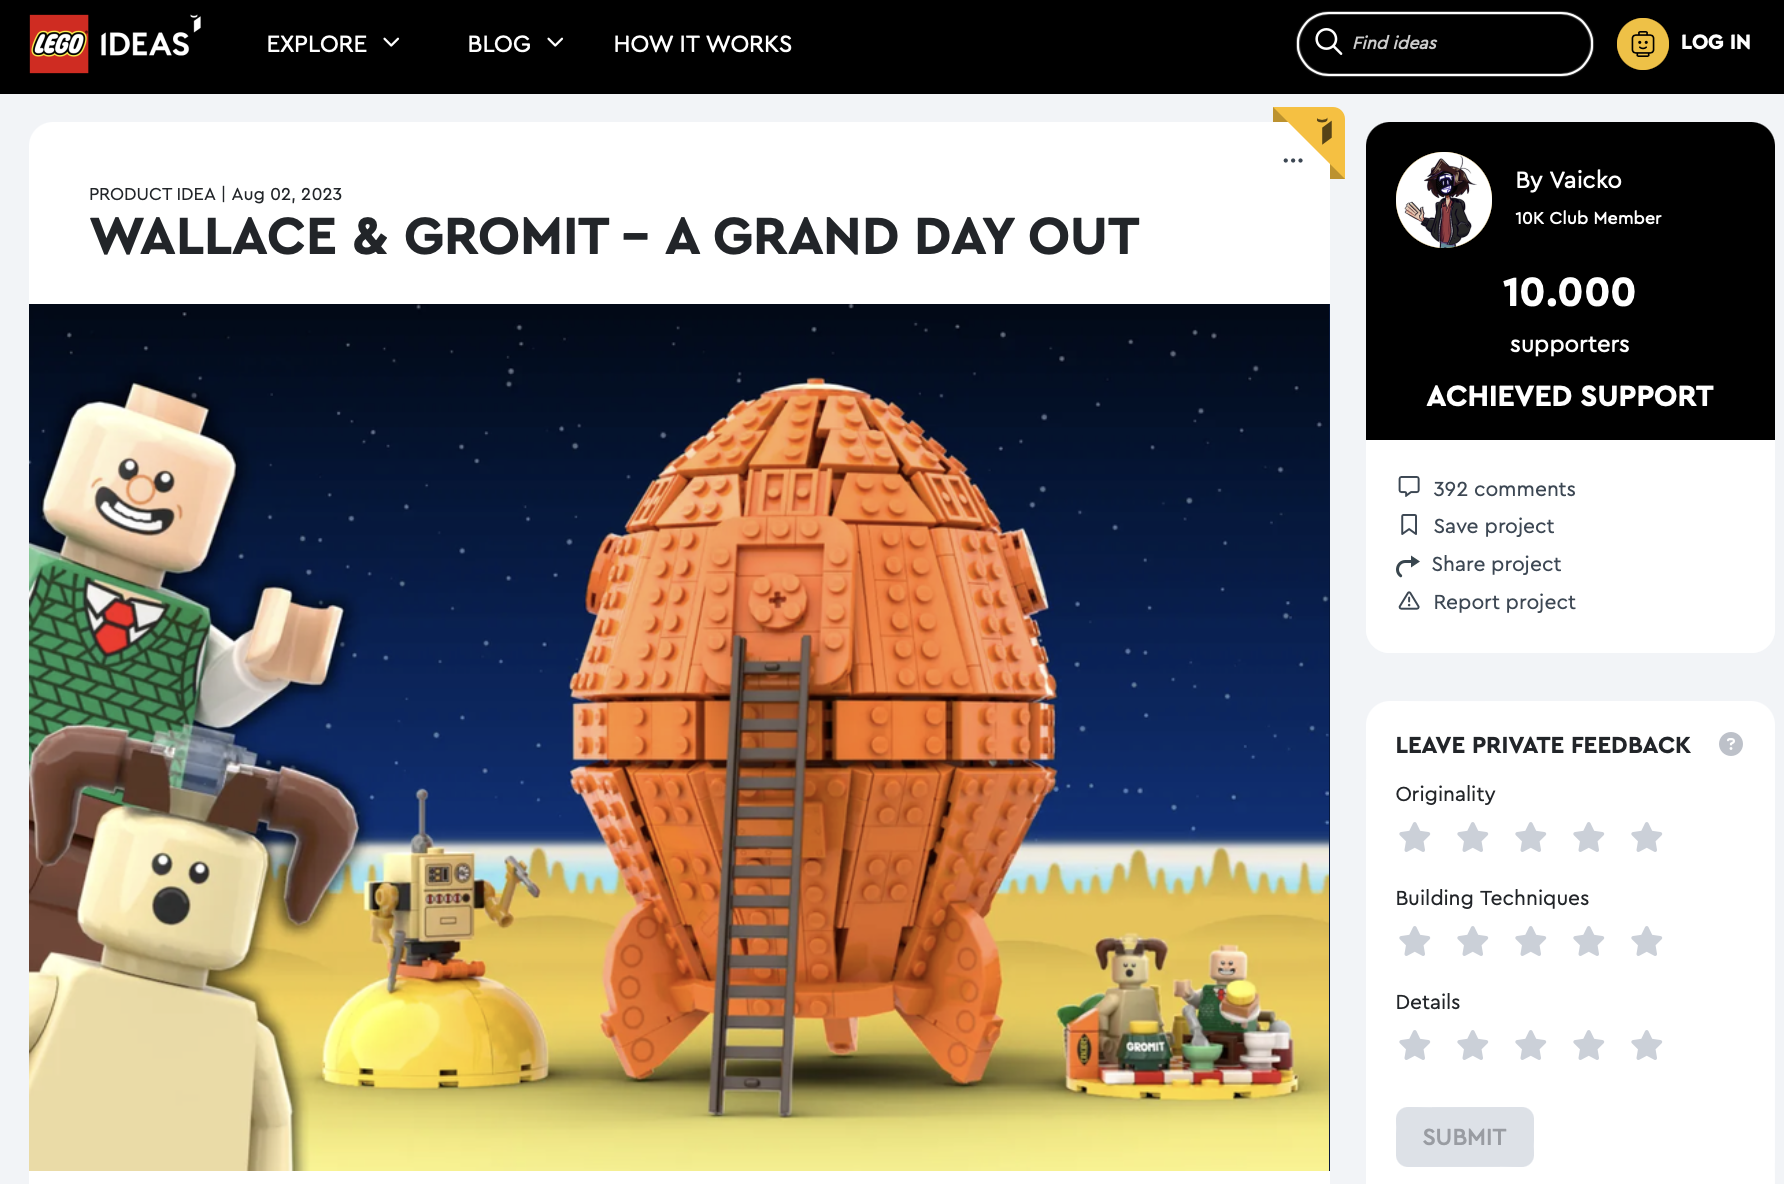 Wallace & Gromit – A Grand Day Out raggiunge i 10k su LEGO Ideas